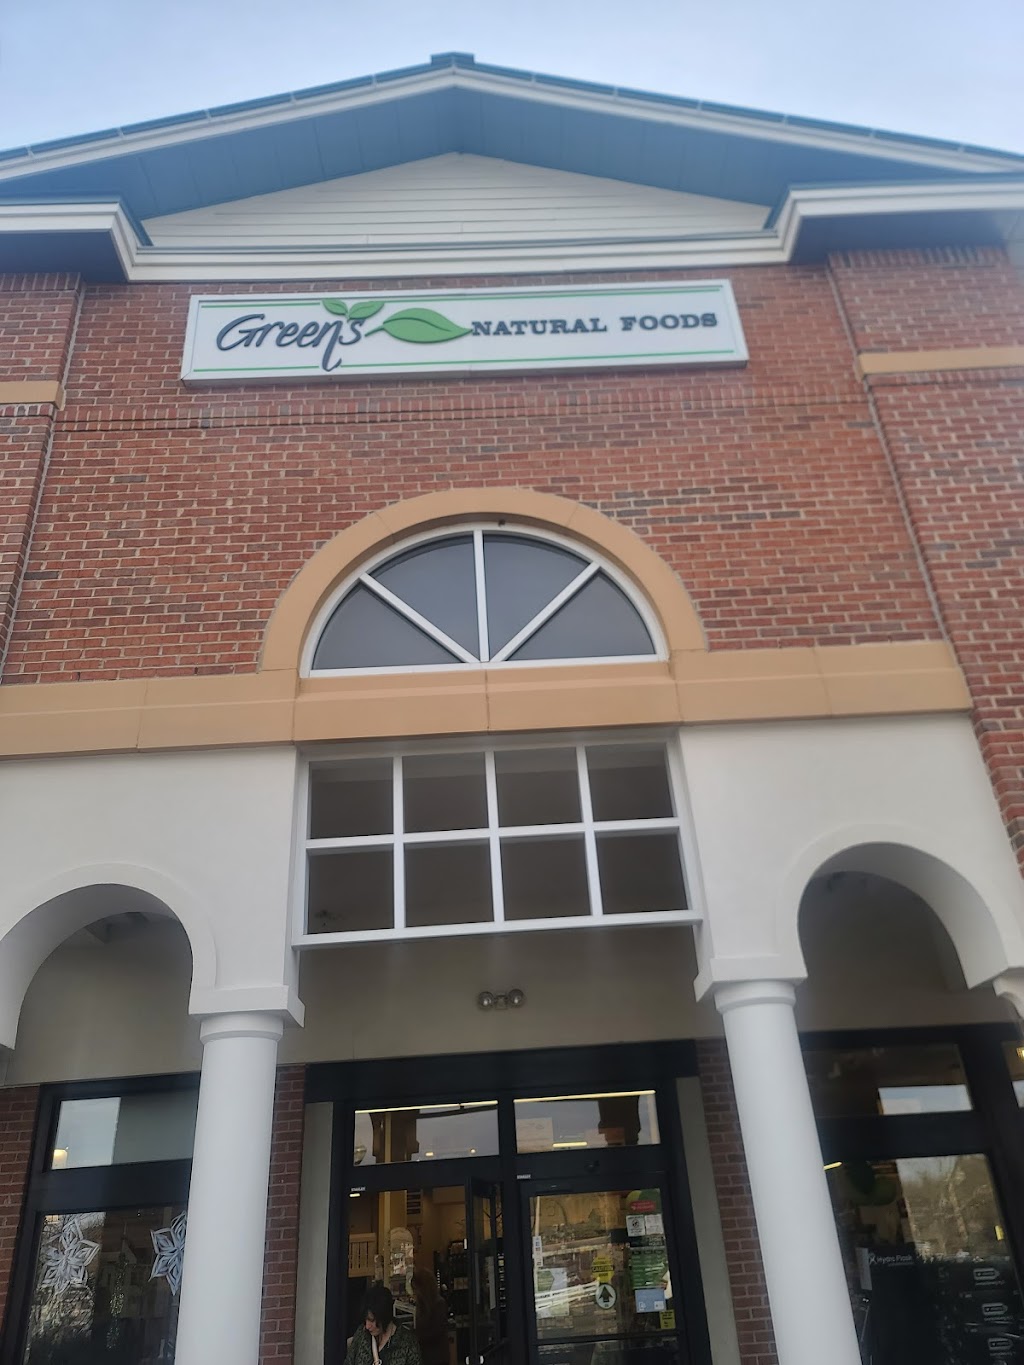 Greens Natural Foods Chester NJ | 270 US-206, Chester, NJ 07930 | Phone: (908) 888-2256